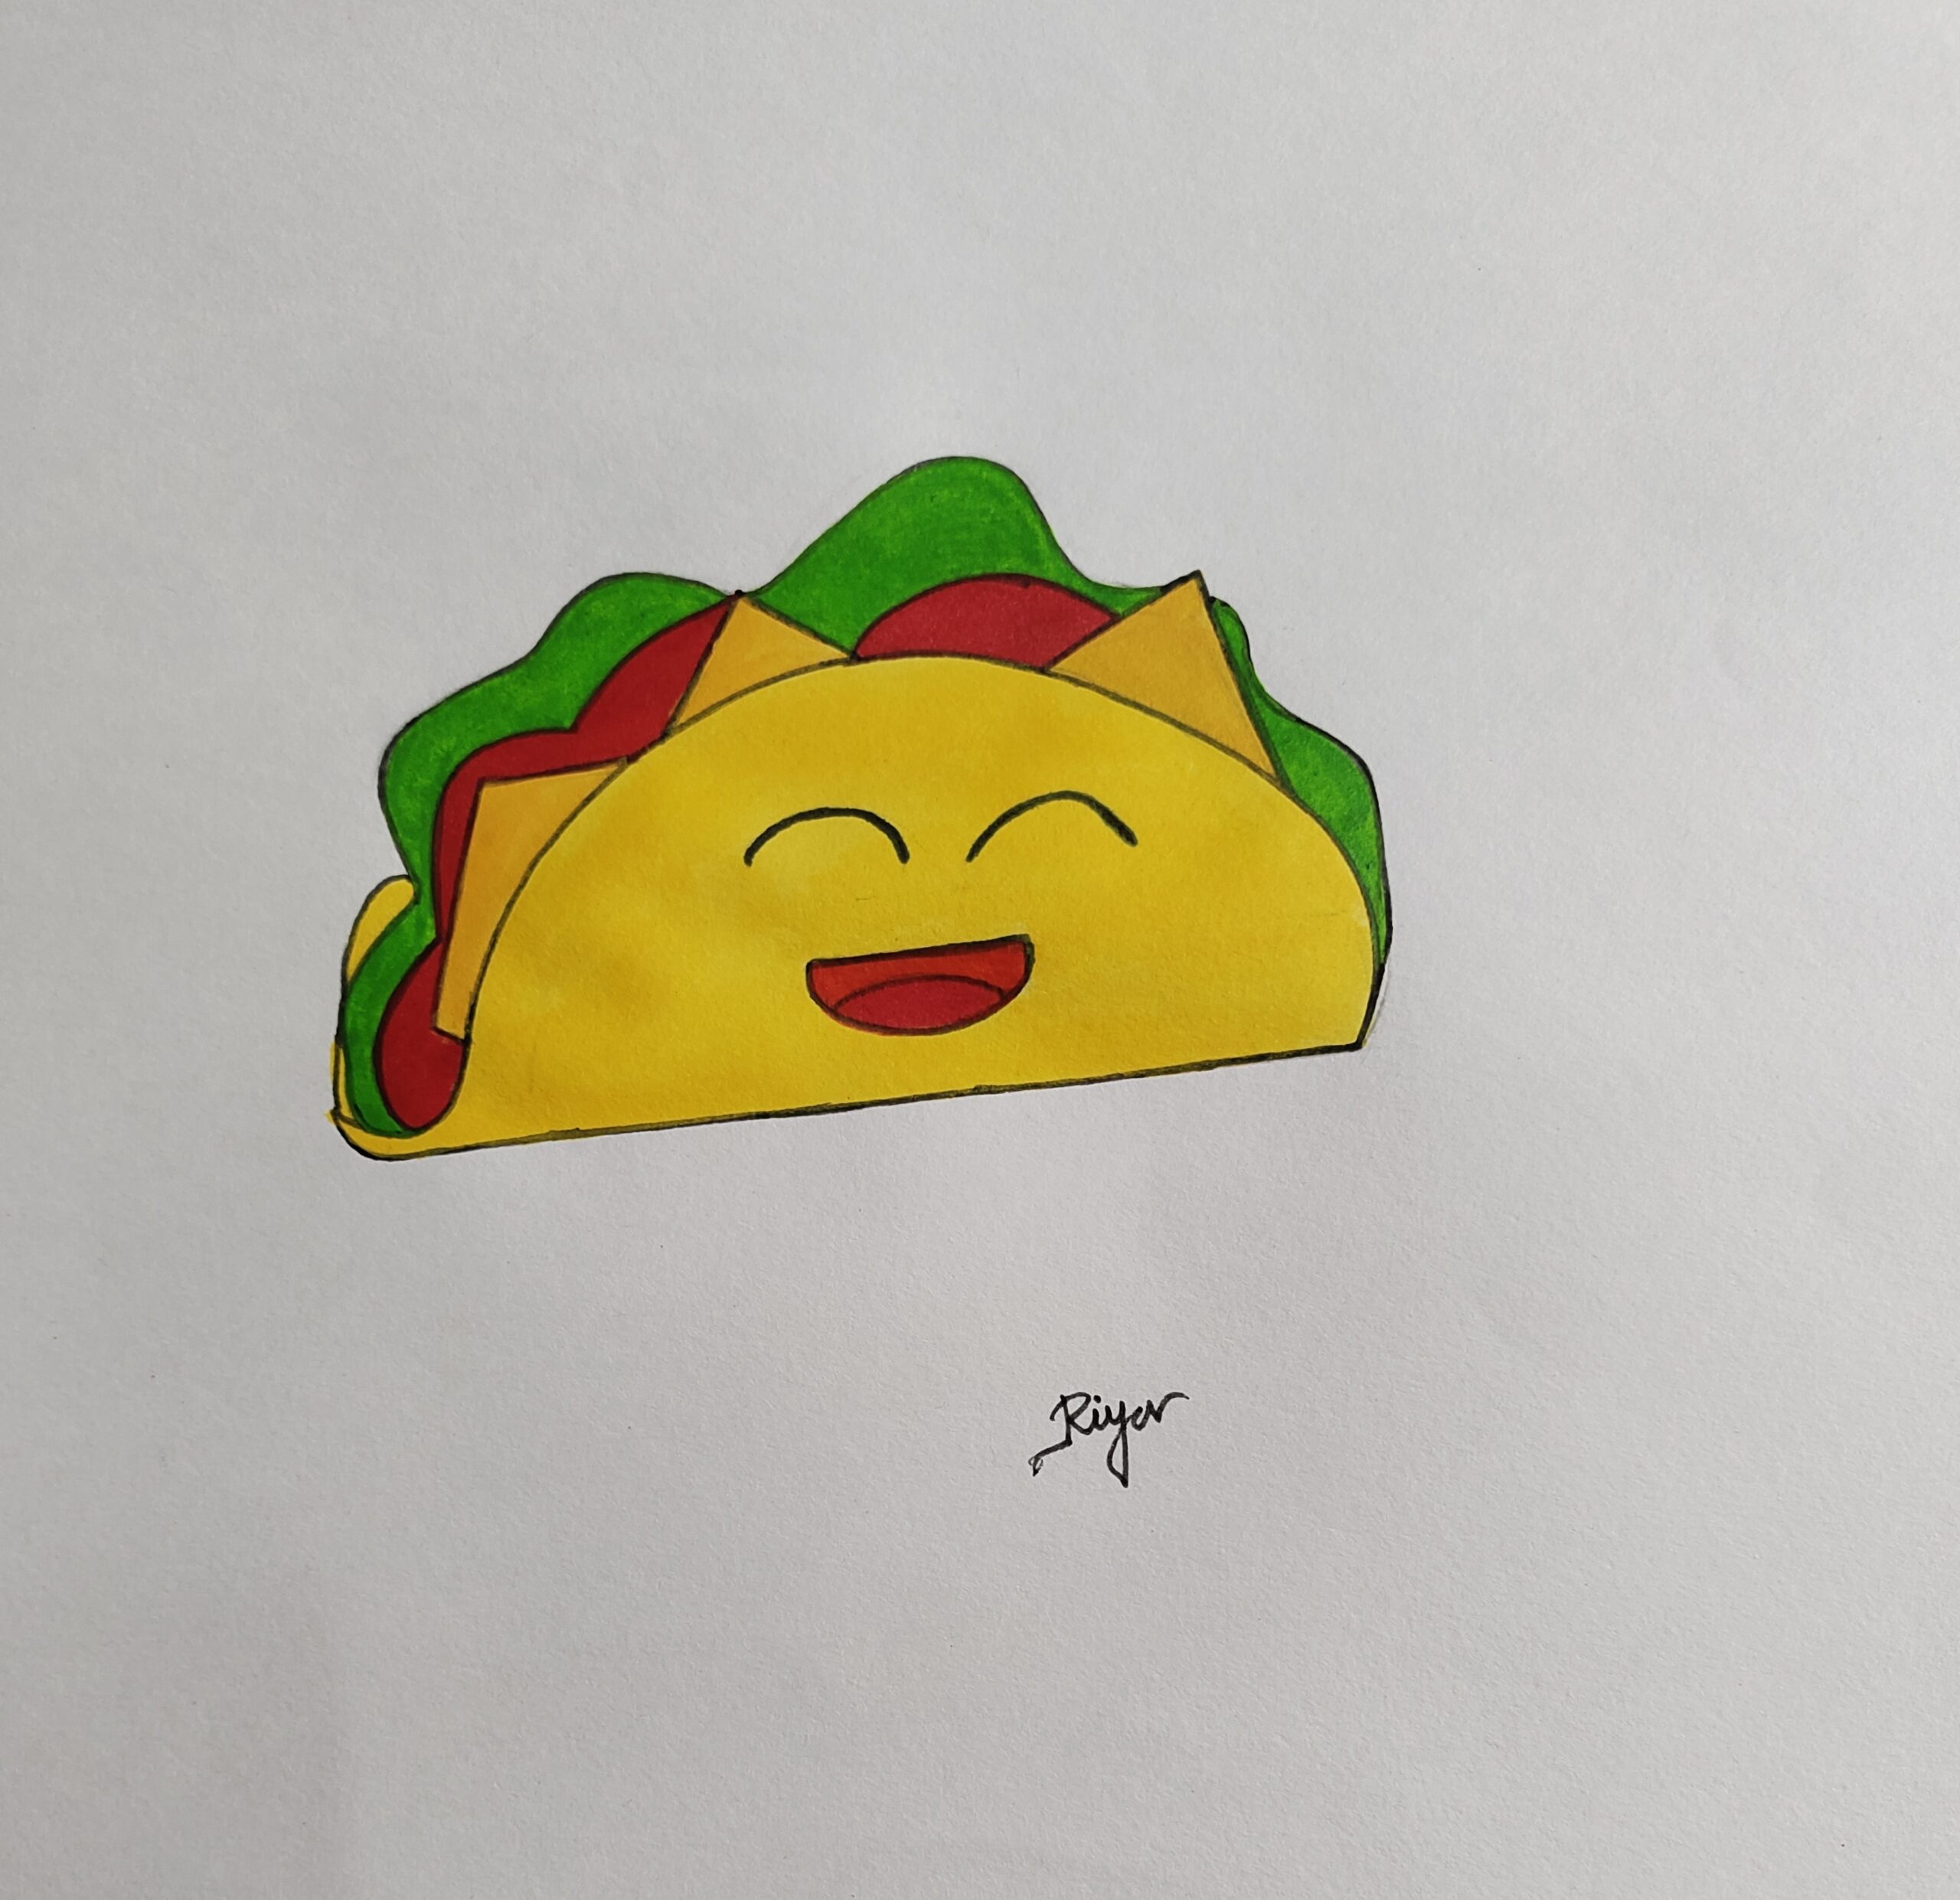 How to draw a Taco Step by Step